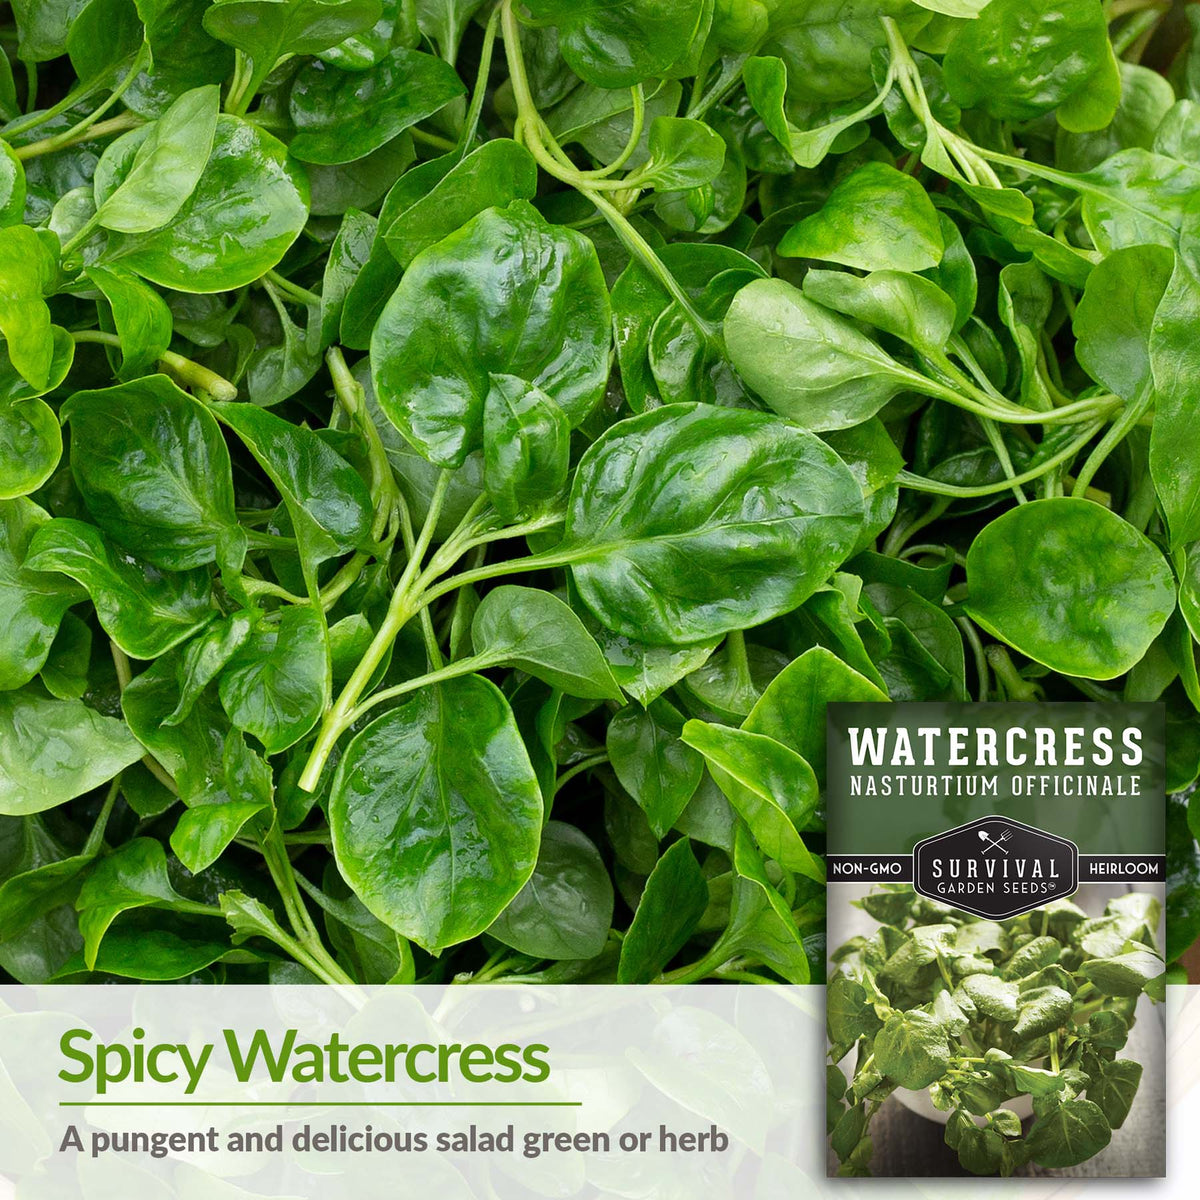 Spicy watercress is delicious in a salad